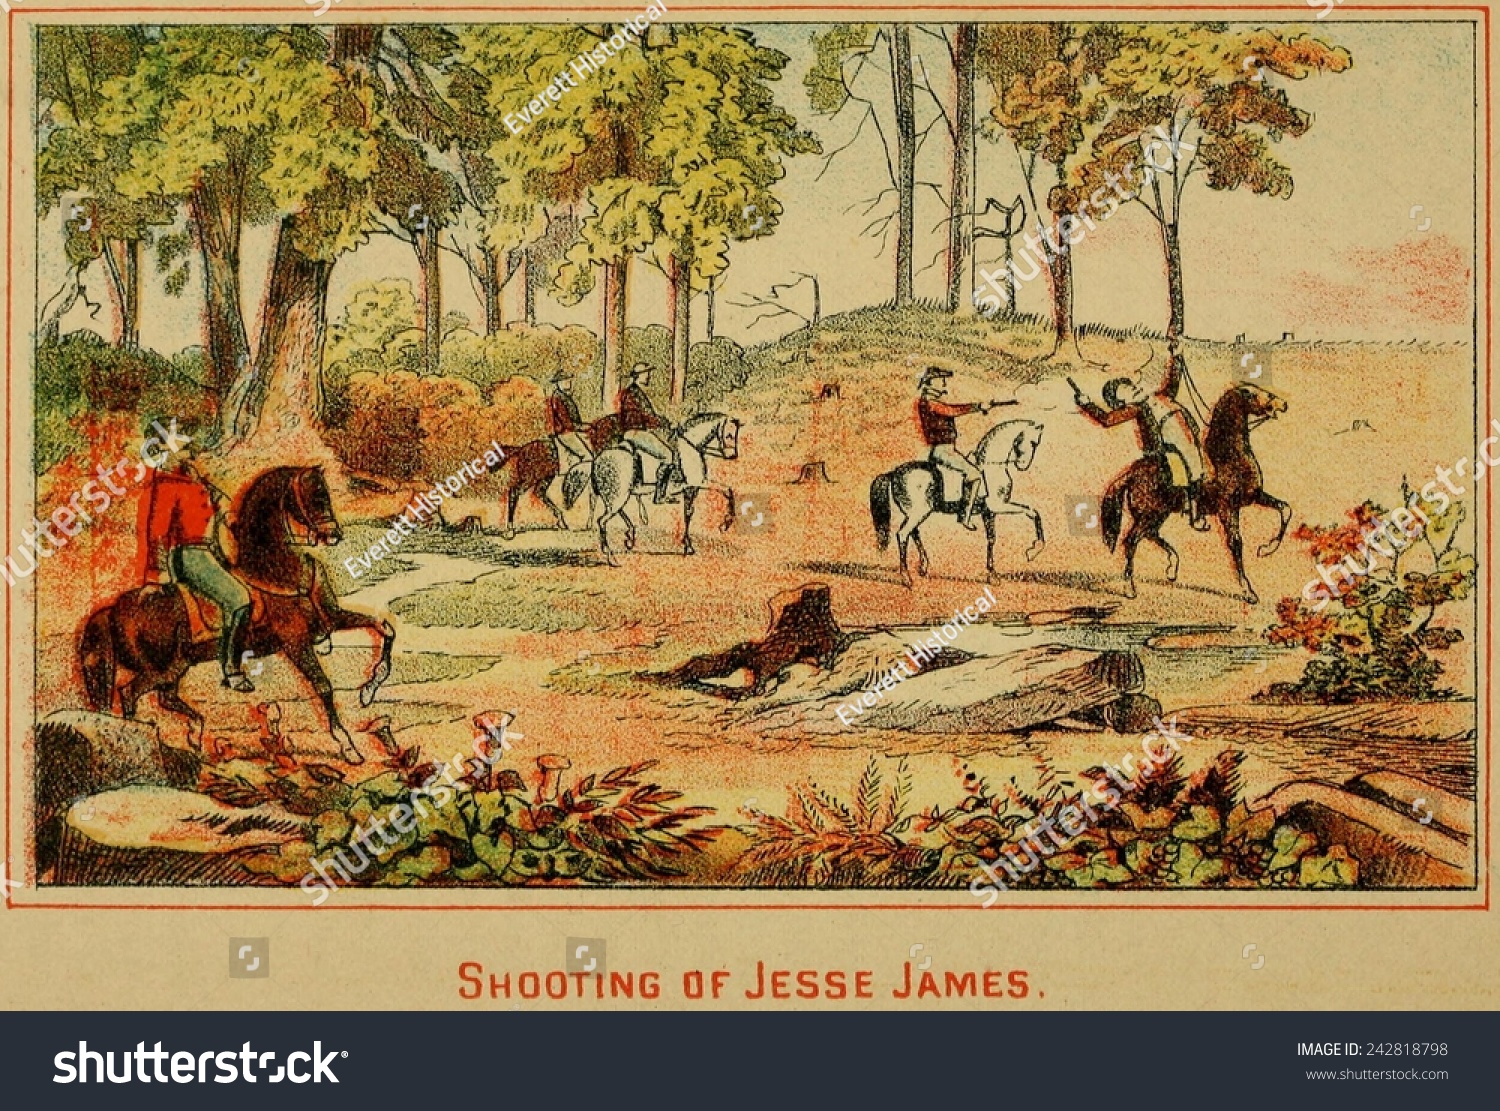 In November 1879, Jesse James was shot in the head by George Shepard, in retaliation for Jesse's earlier involvement in the murder and robbery of his nephew, Ike Flannery. #242818798